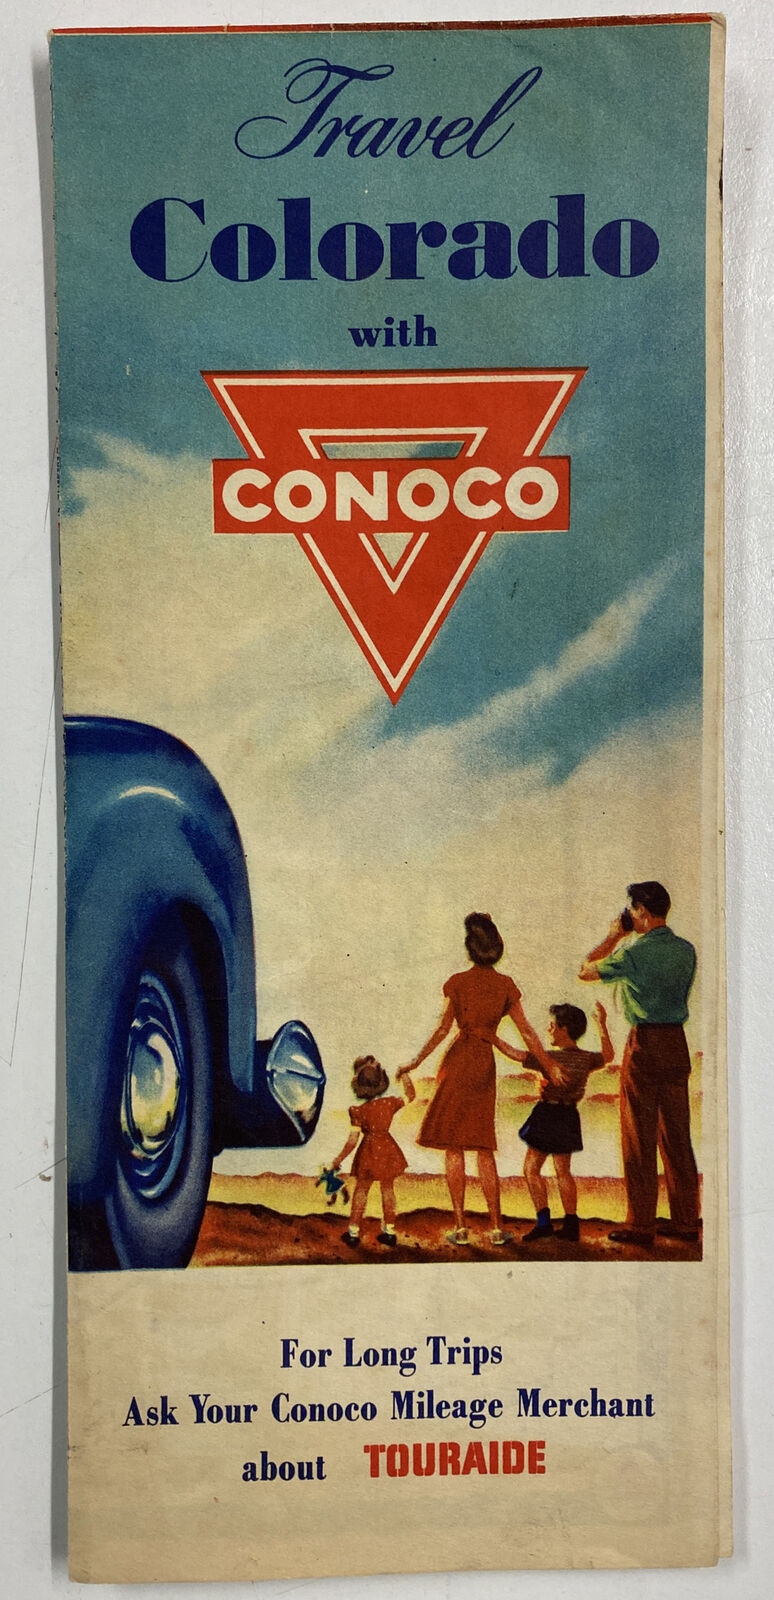 Vintage 1940s Travel Colorado With Conoco State Road Map - Advertising